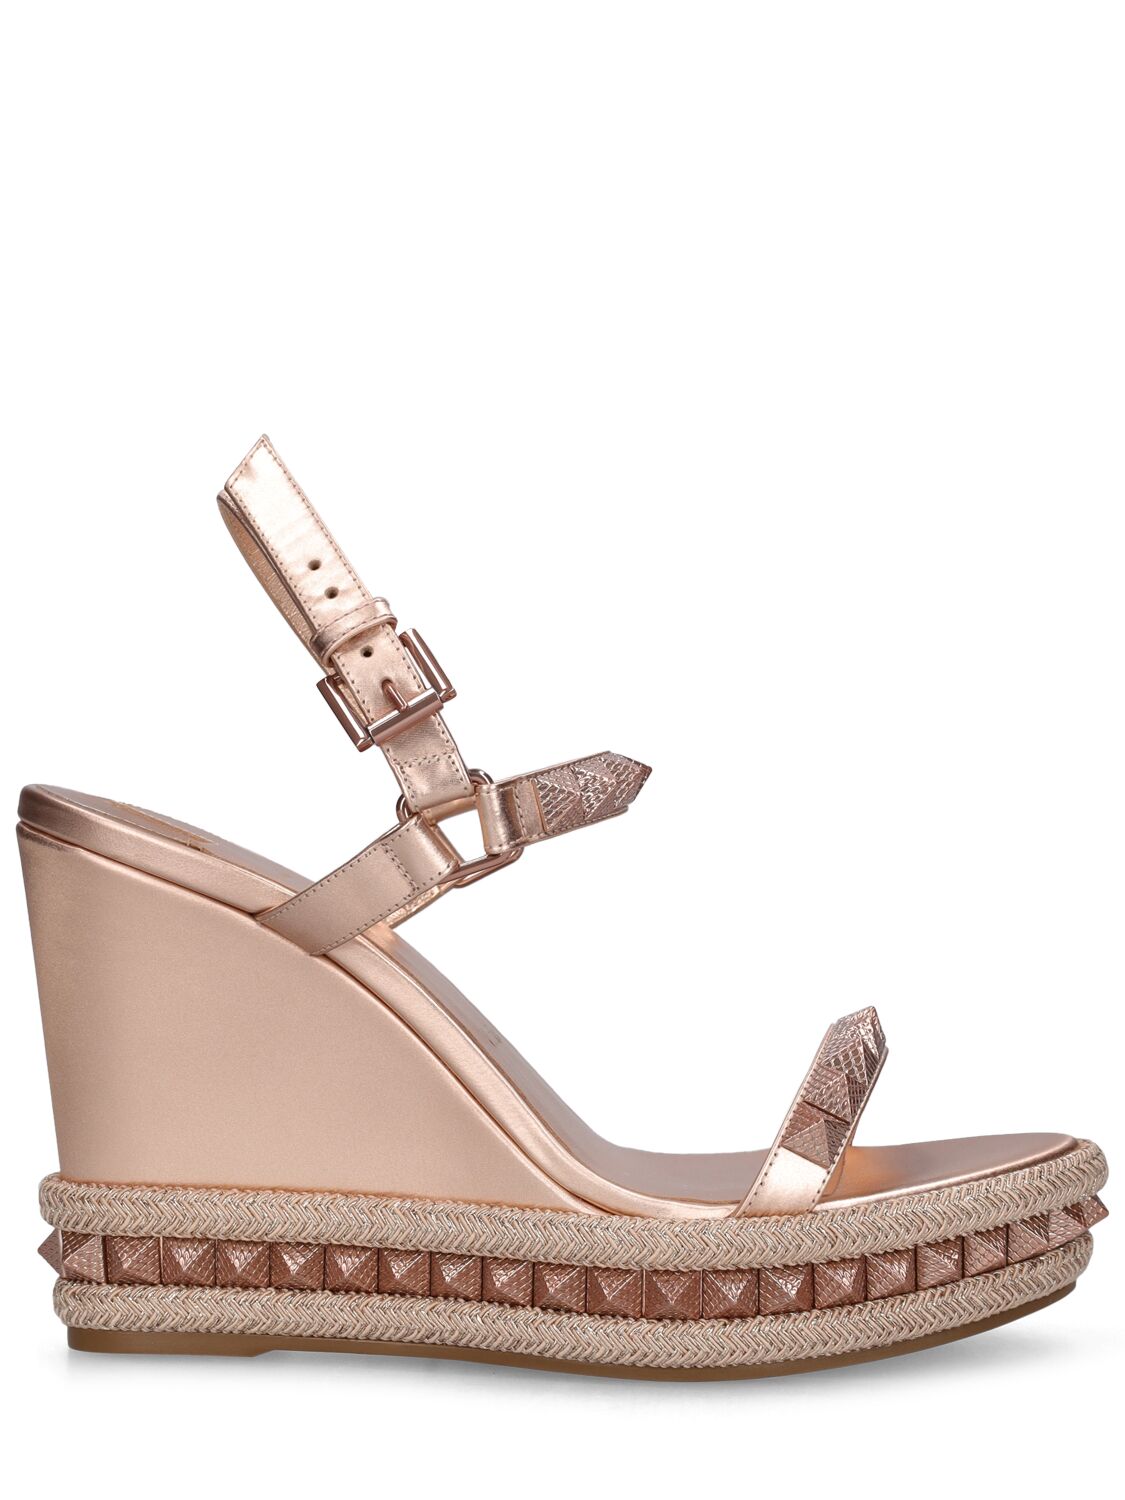 Shop Christian Louboutin 110mm Pyraclou Glittered Wedges In Light Gold